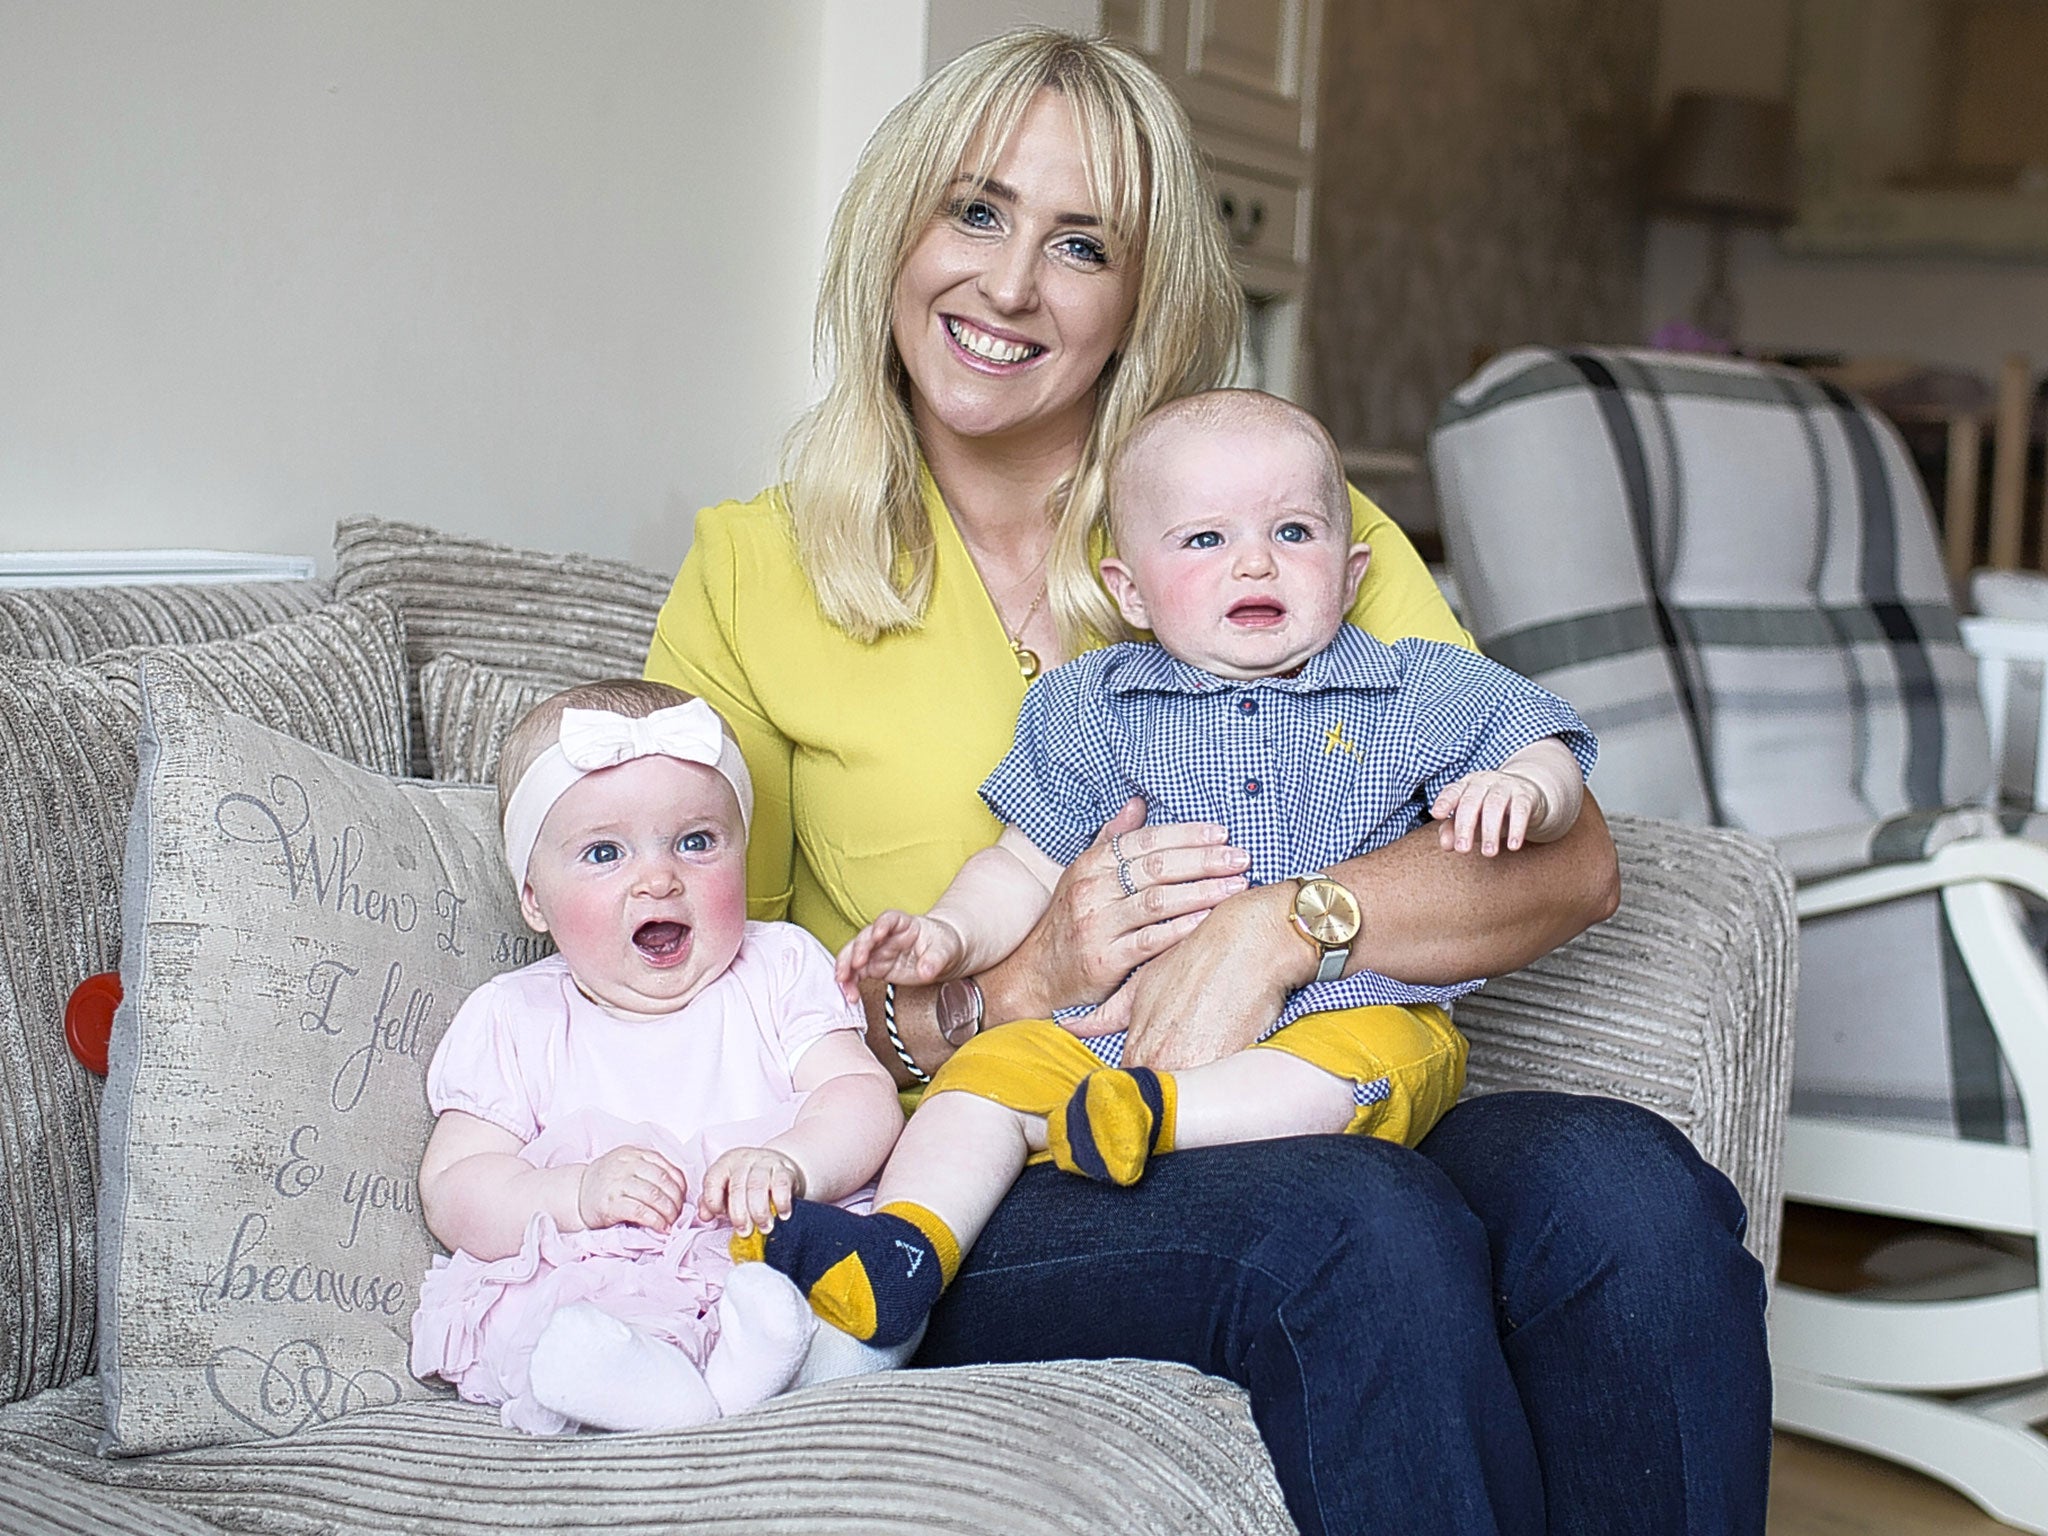 Lizzie Jones, widow of rugby league player Danny Jones, with children Phoebe and Bobby